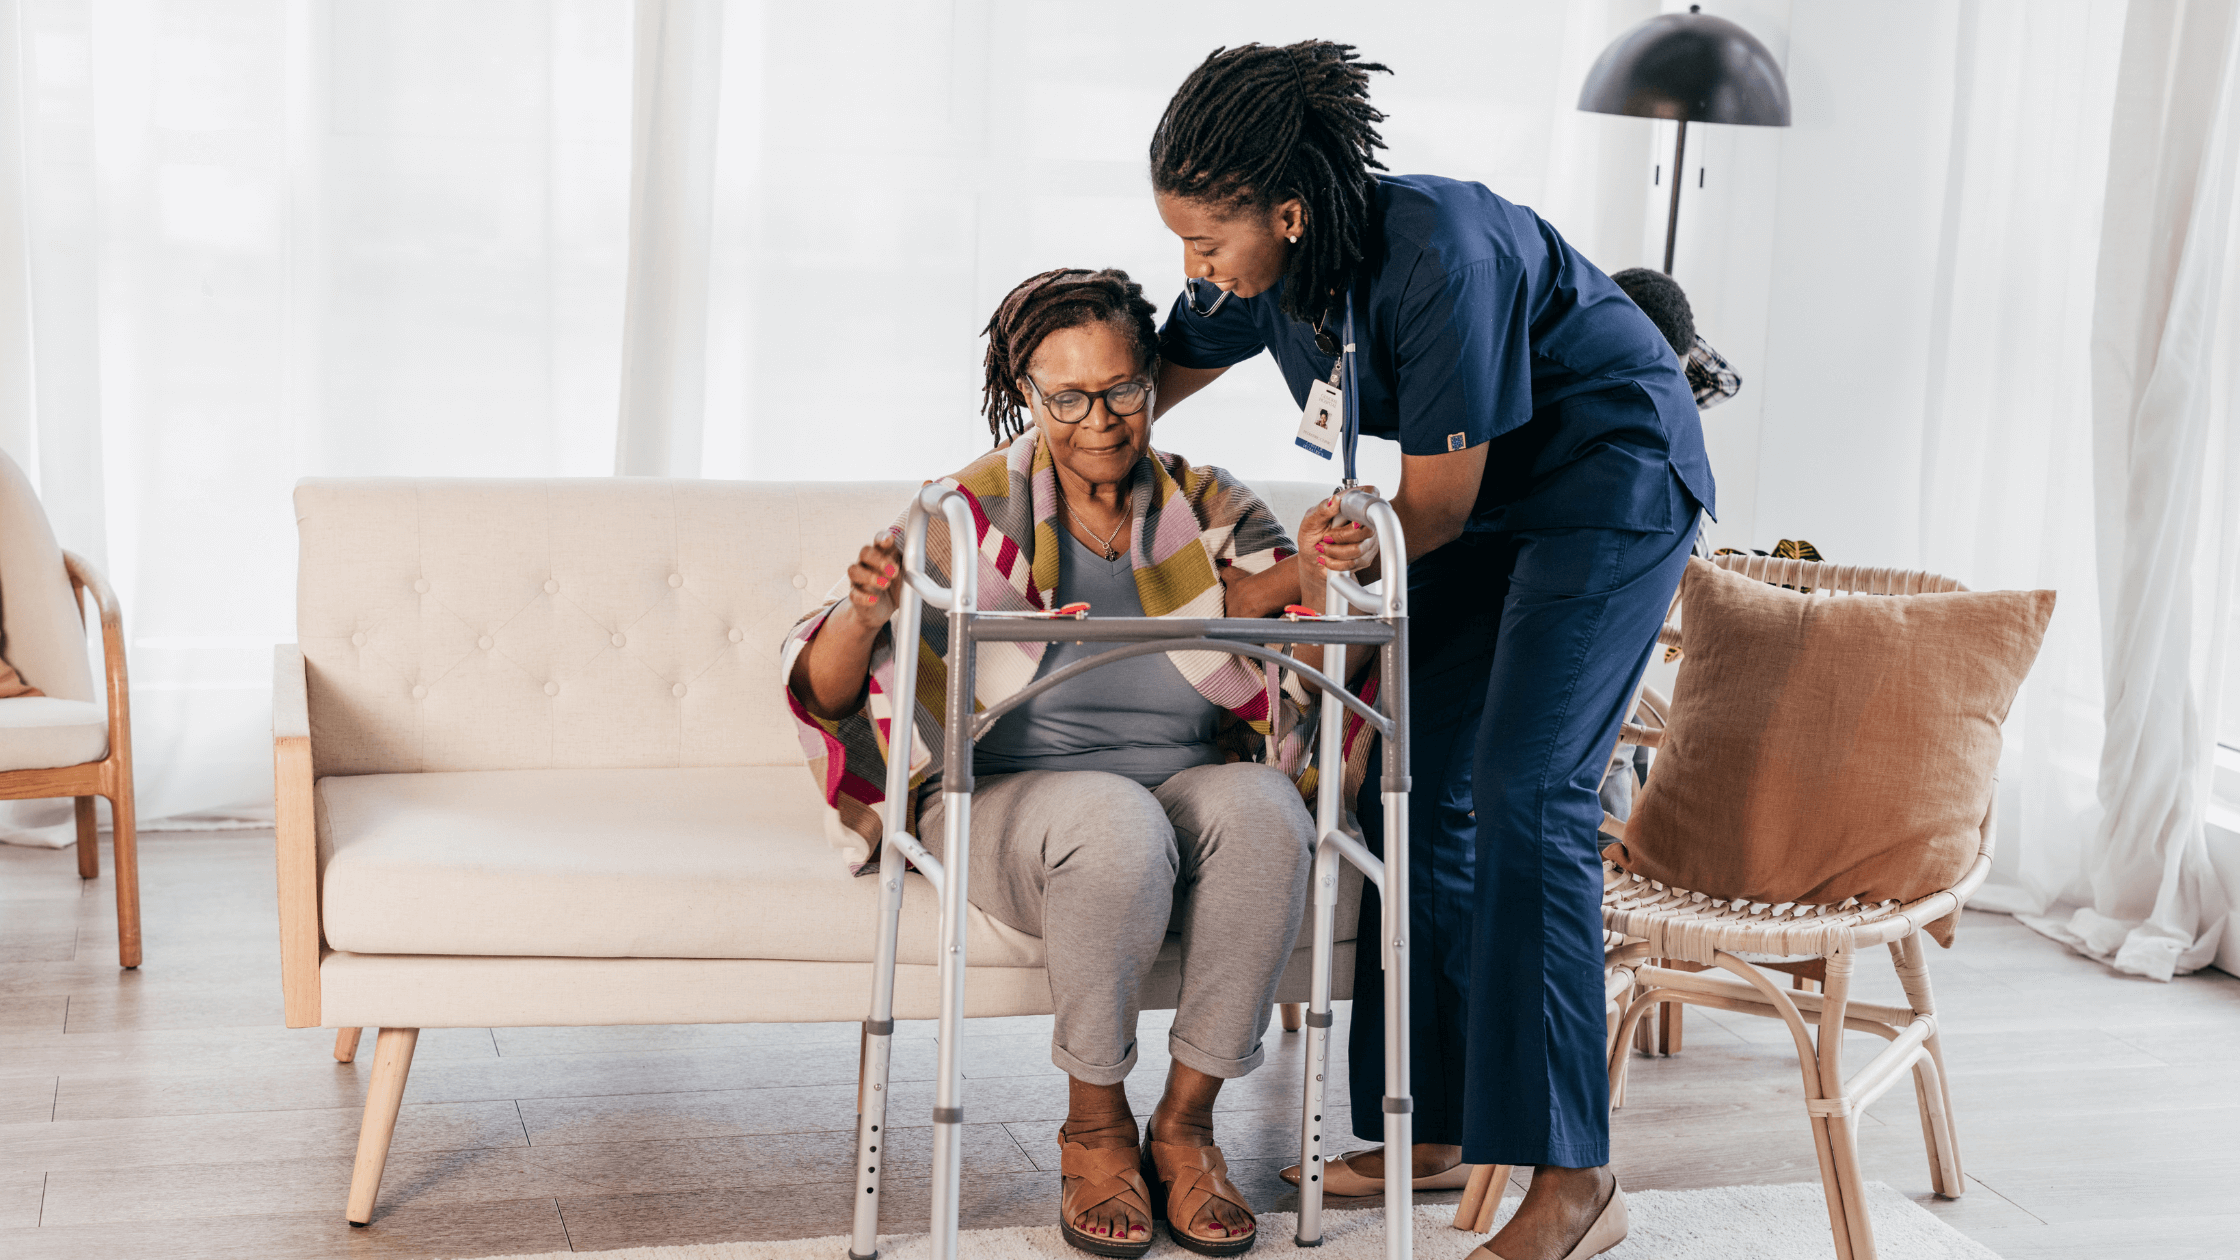 Female caregiver assisting senior woman to standing using her standing aid in home